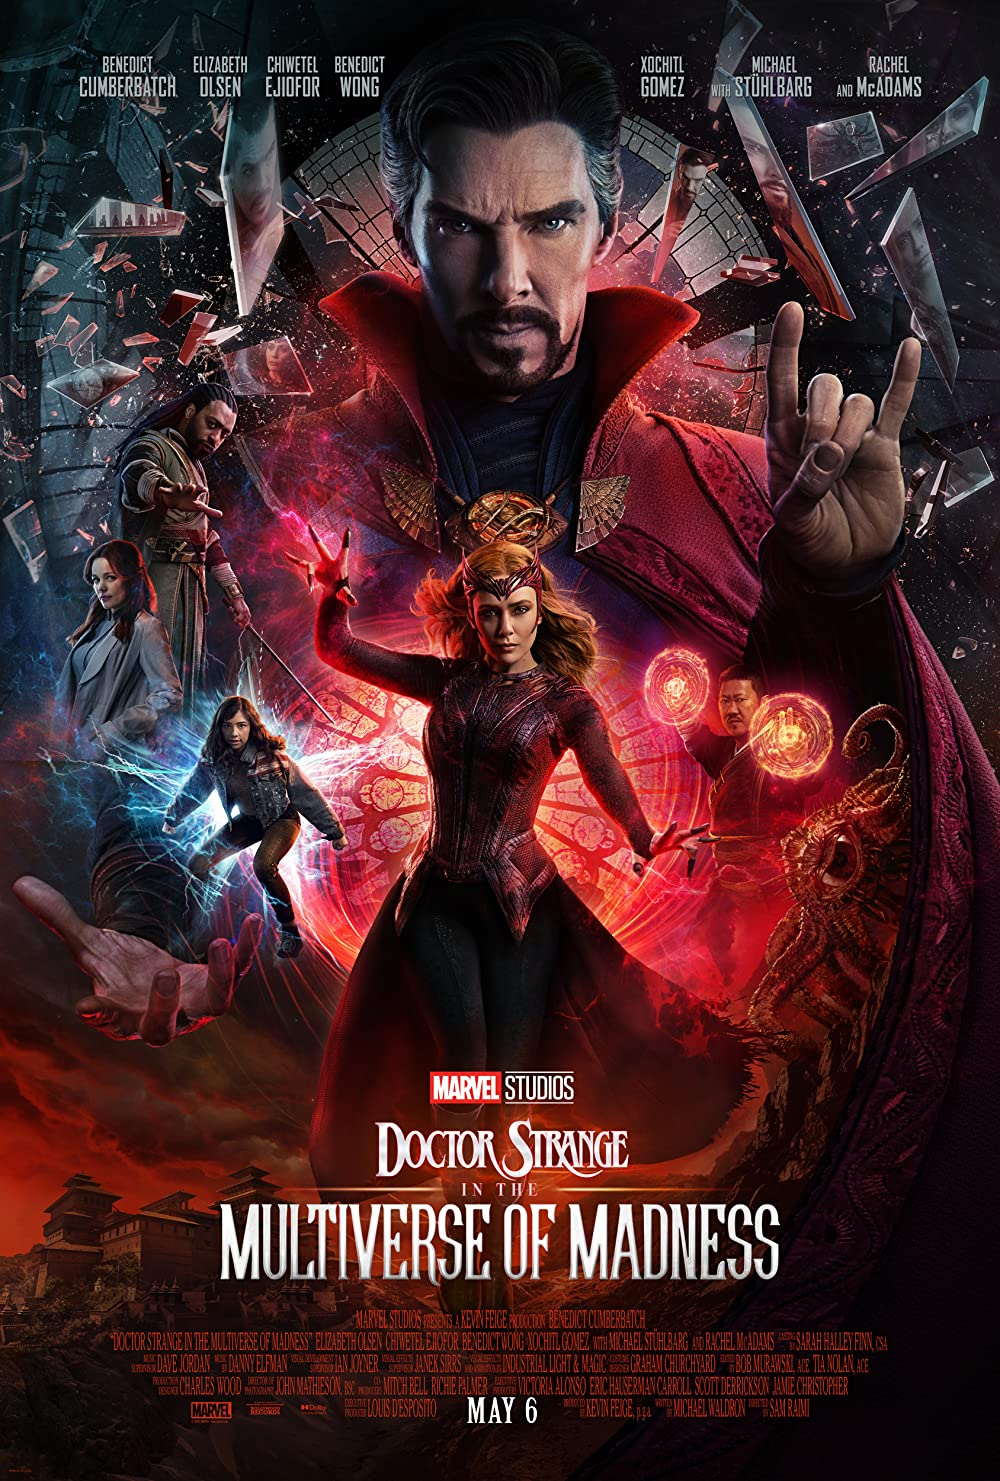 Second movie poster released for Doctor Strange in the Multiverse of Madness. It prominently features Scarlet Witch/Wanda